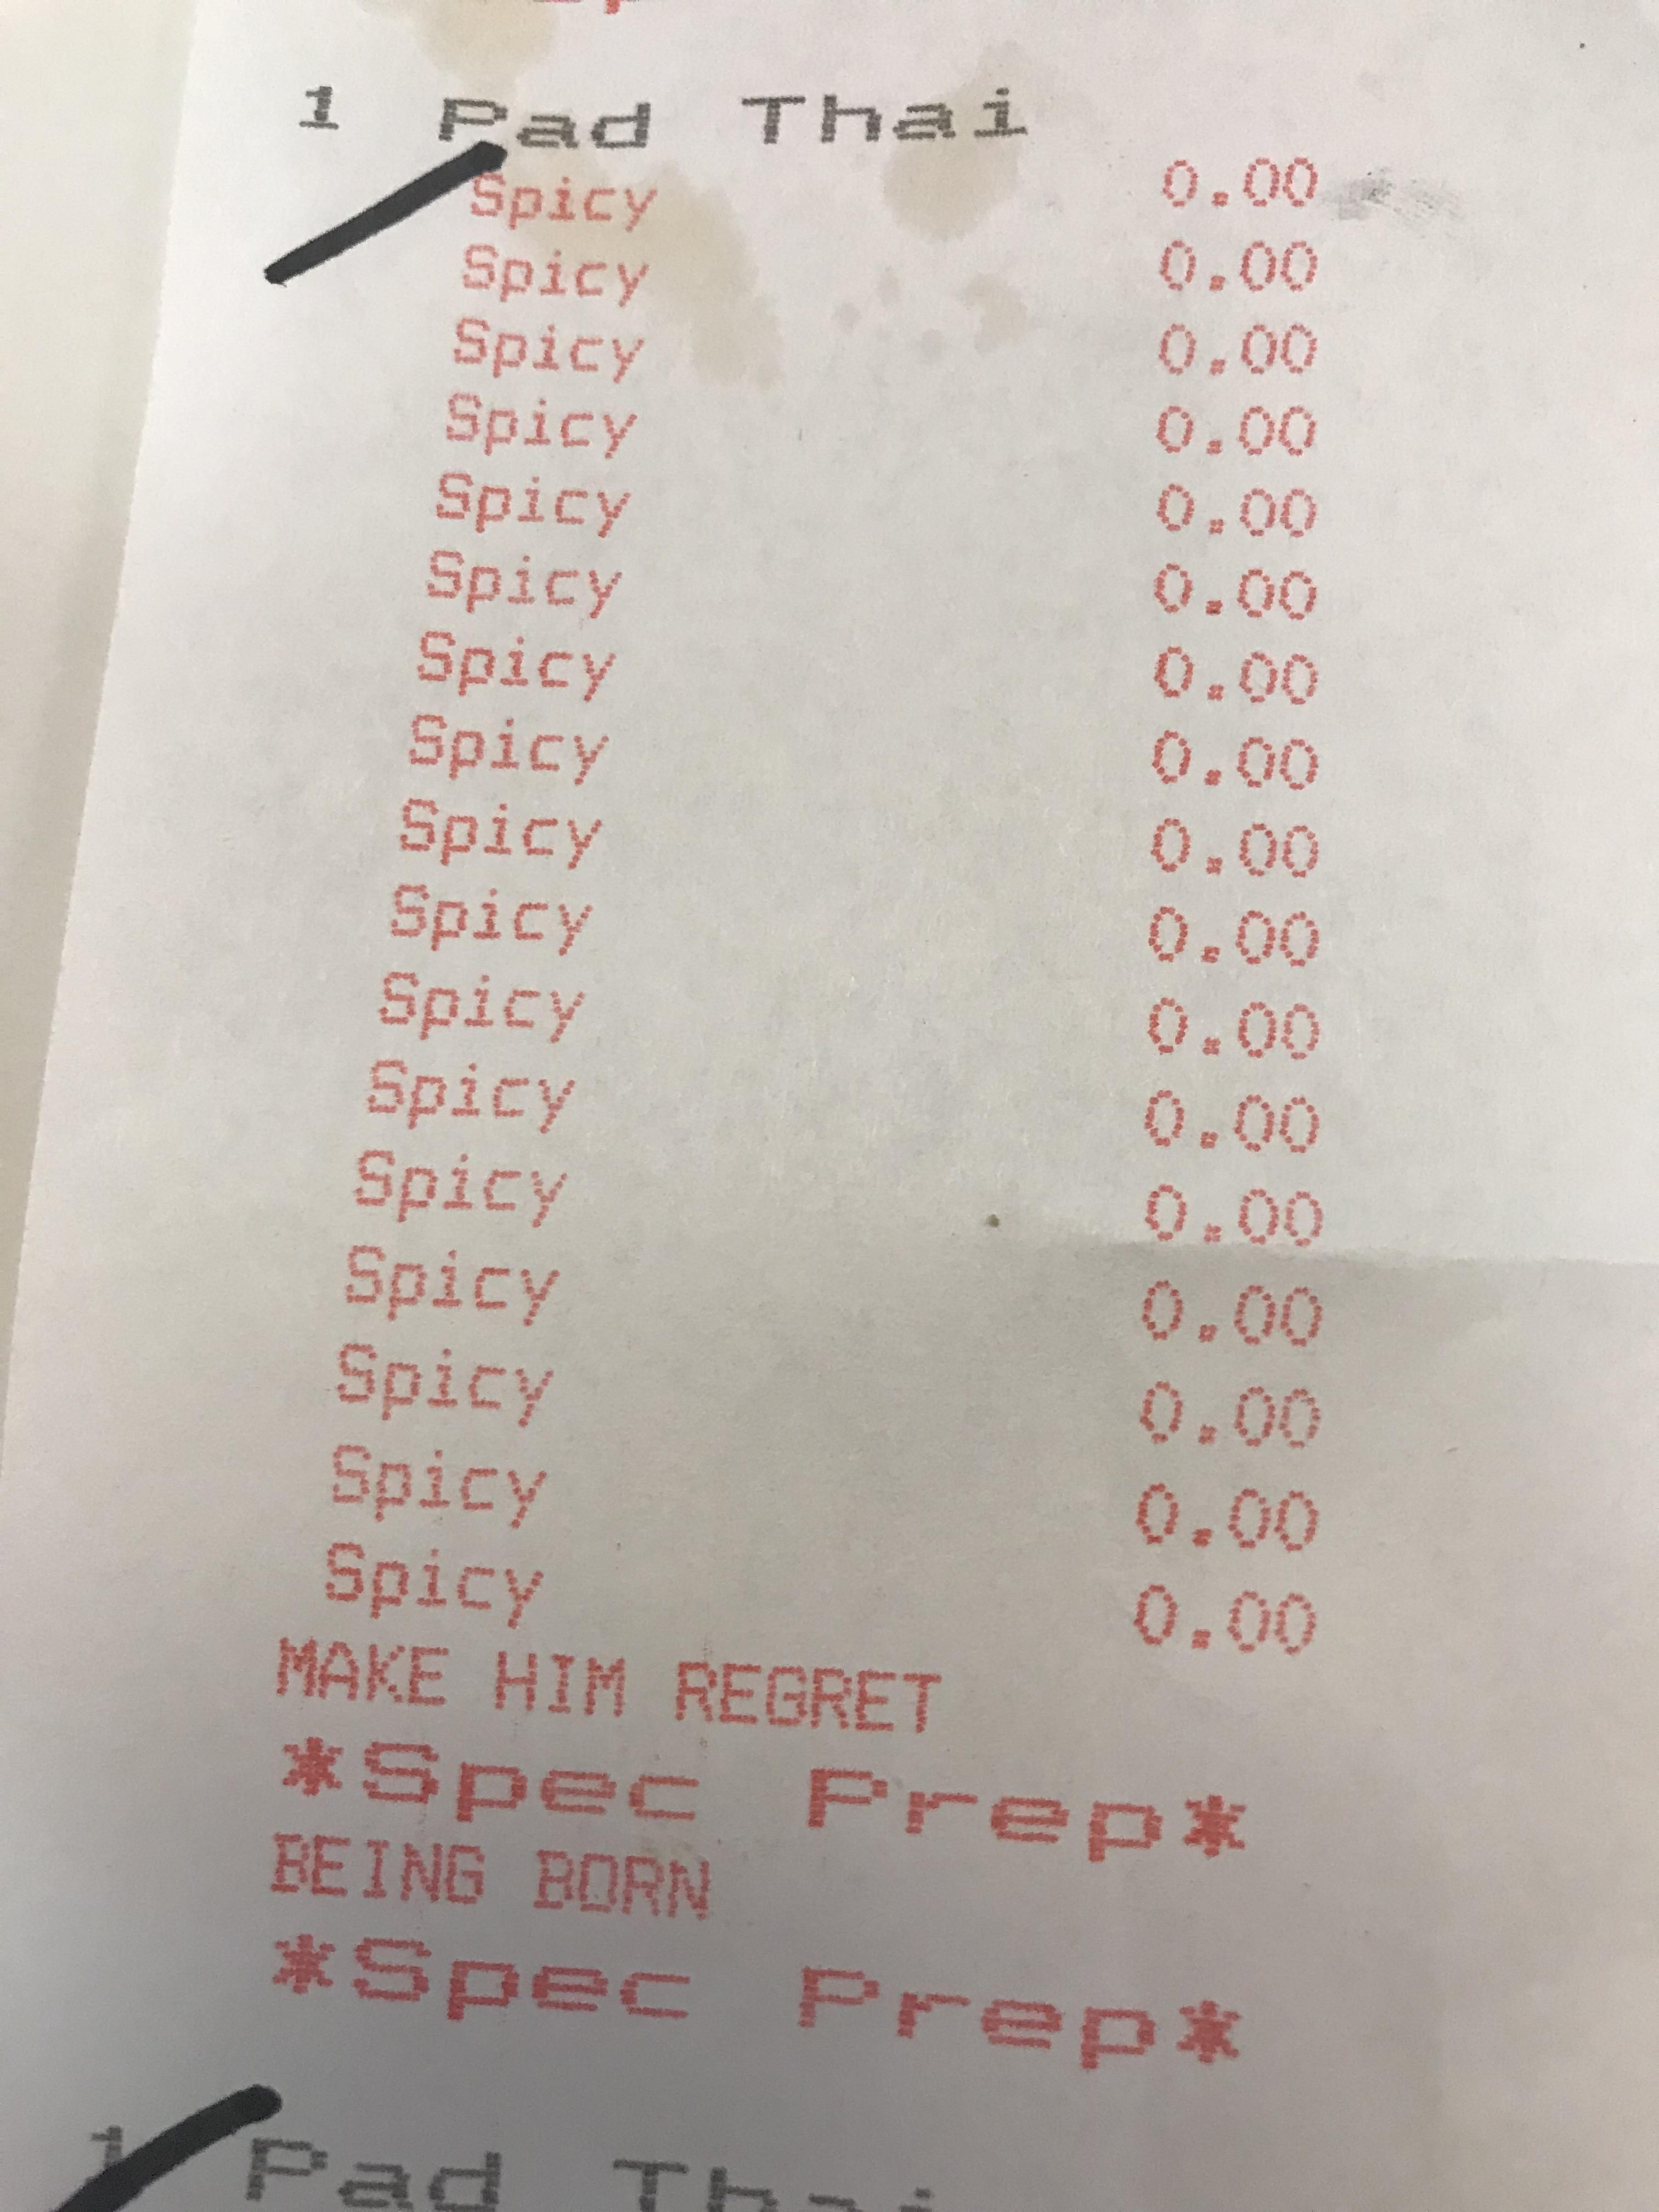 I asked for extra spicy Pad Thai today.